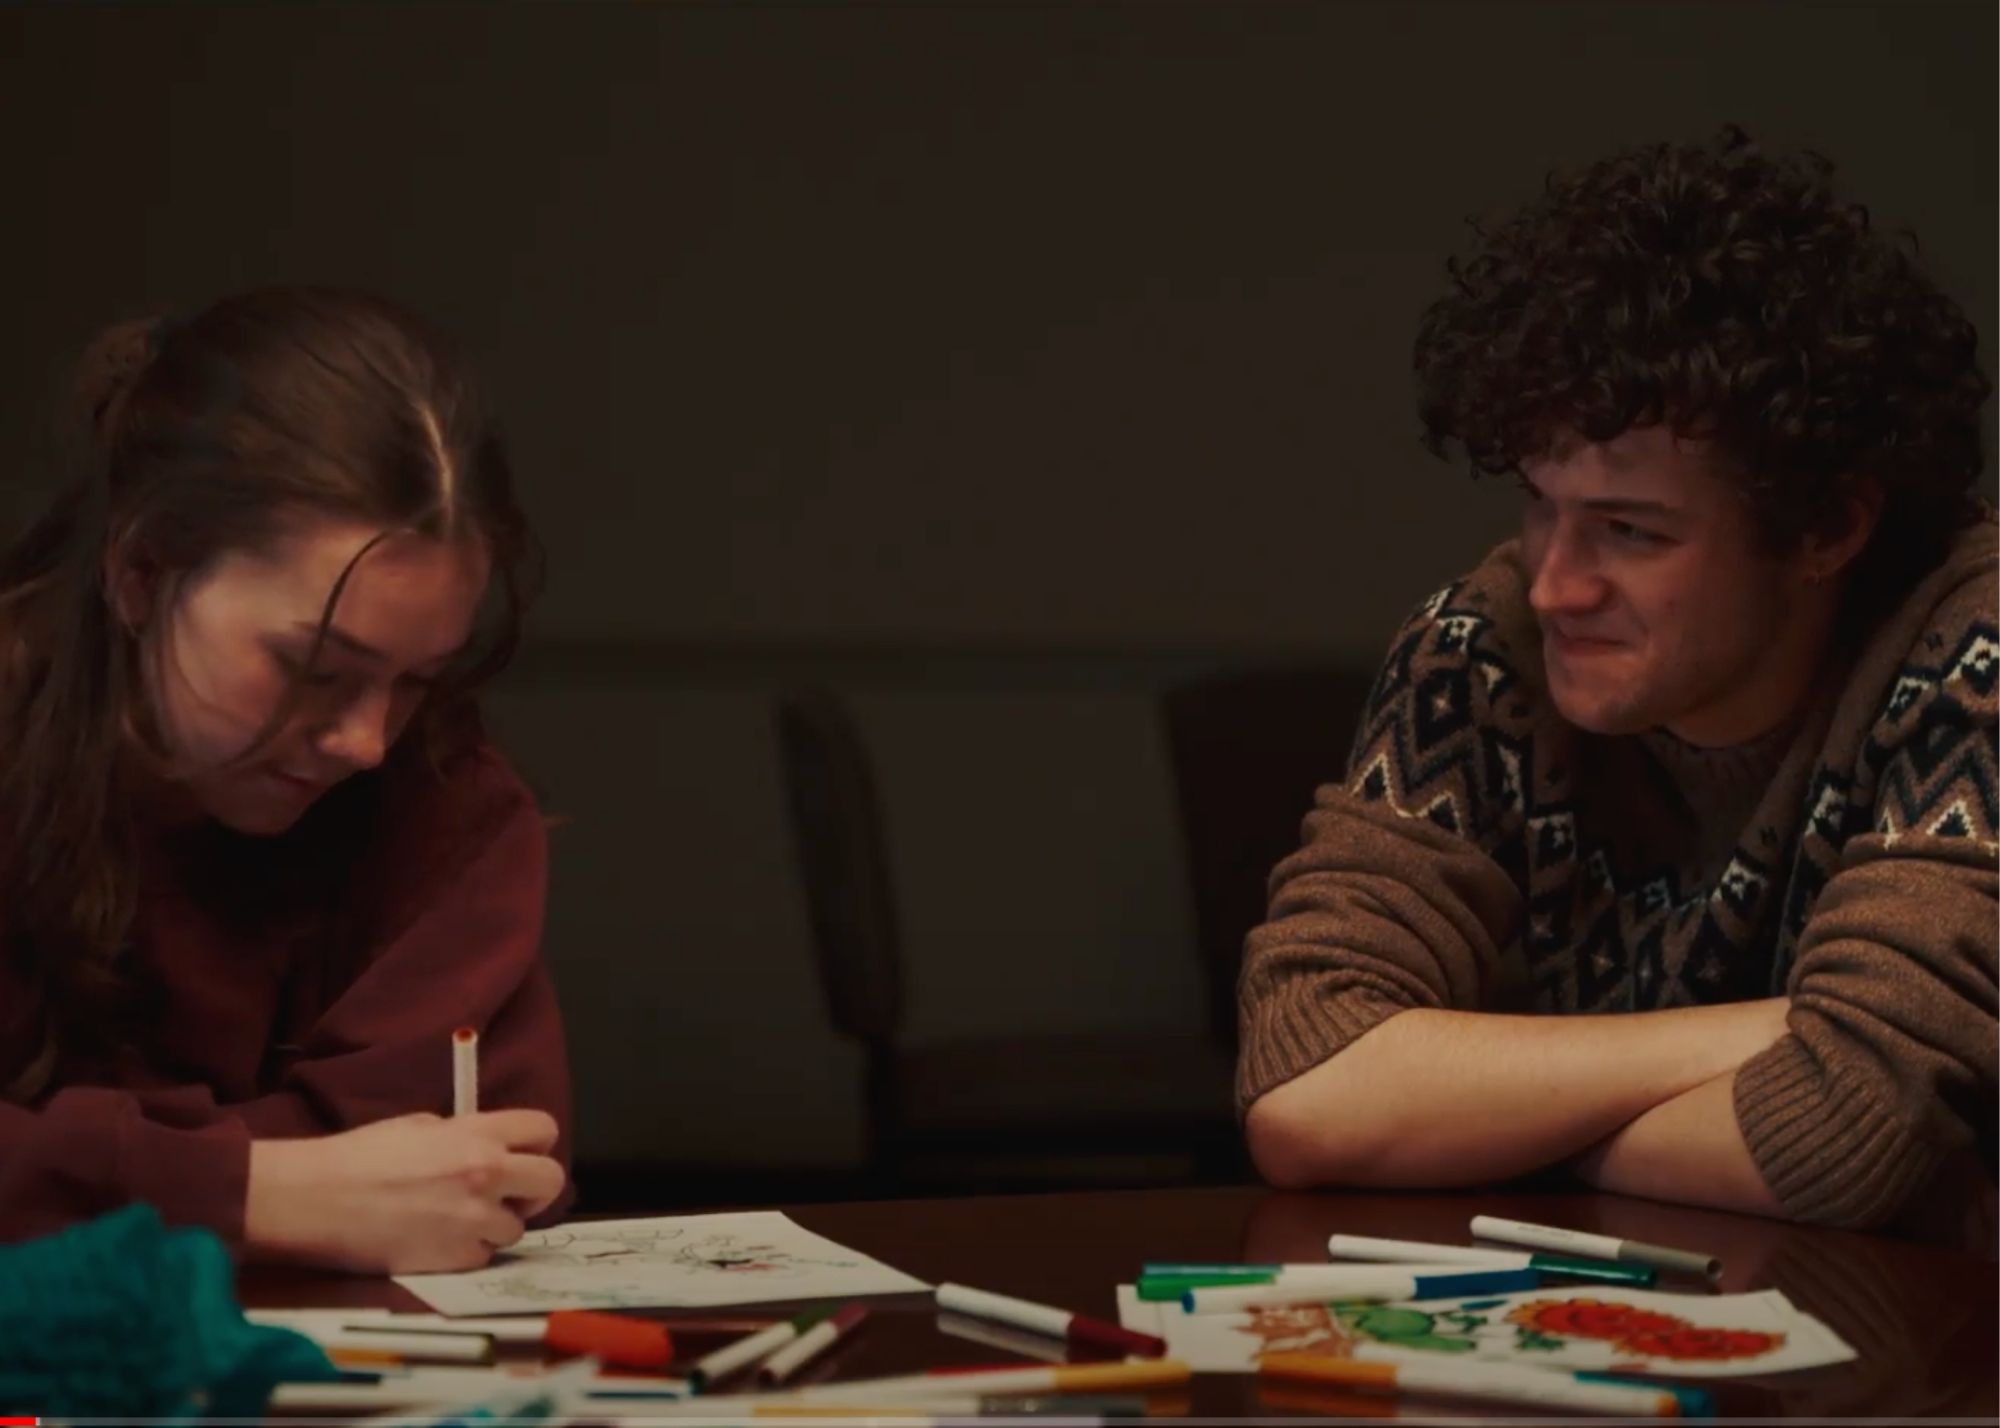 Julianne Cozette '22 and Richard Diamond '22 star in the short film "Be Well," written and produced by Cozette